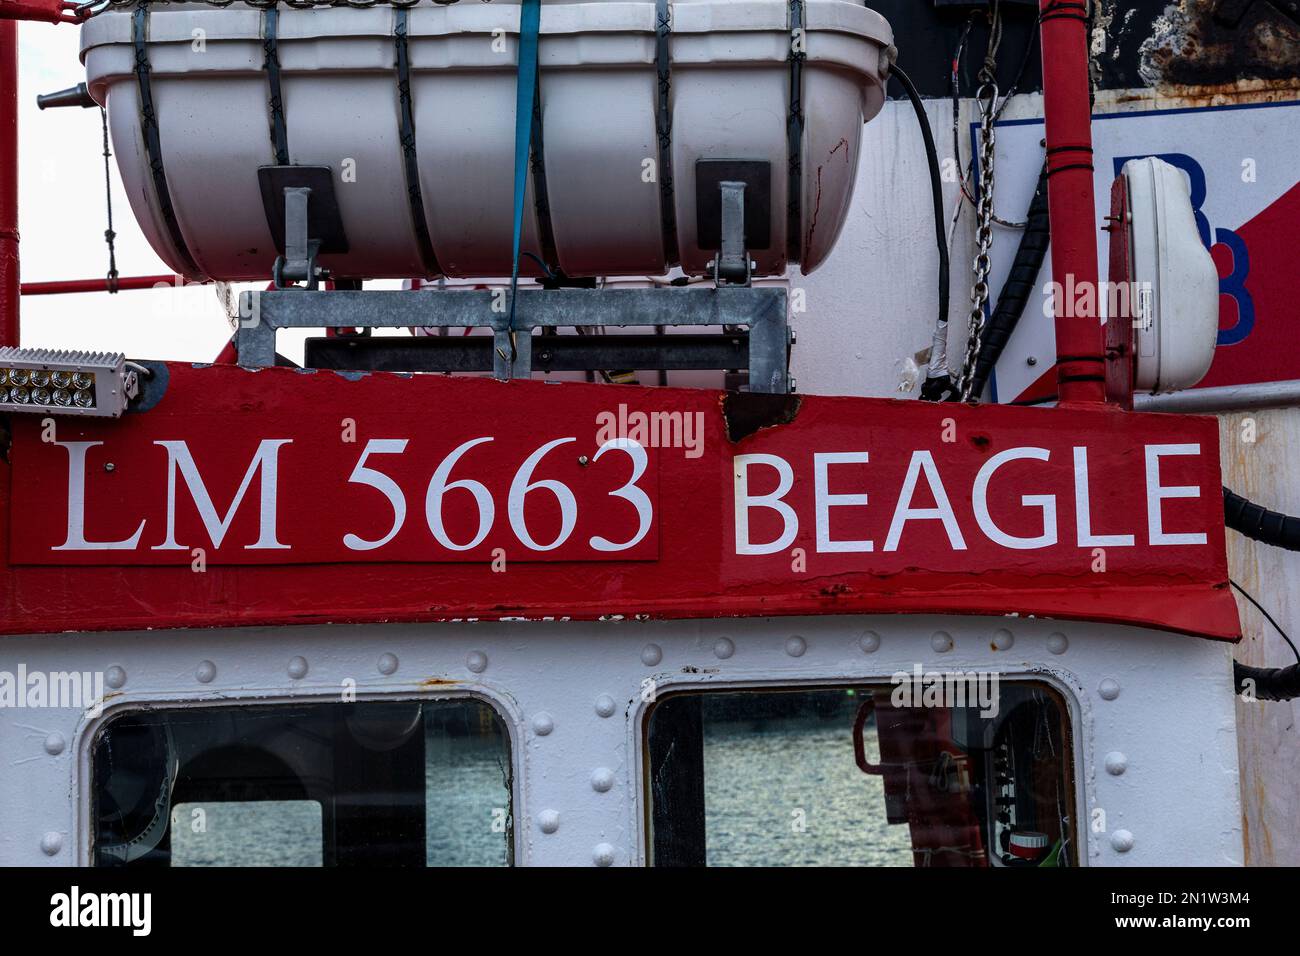 Vessel name and hull details of veteran tug boat Beagle moored in the port of Bergen, Norway. Stock Photo